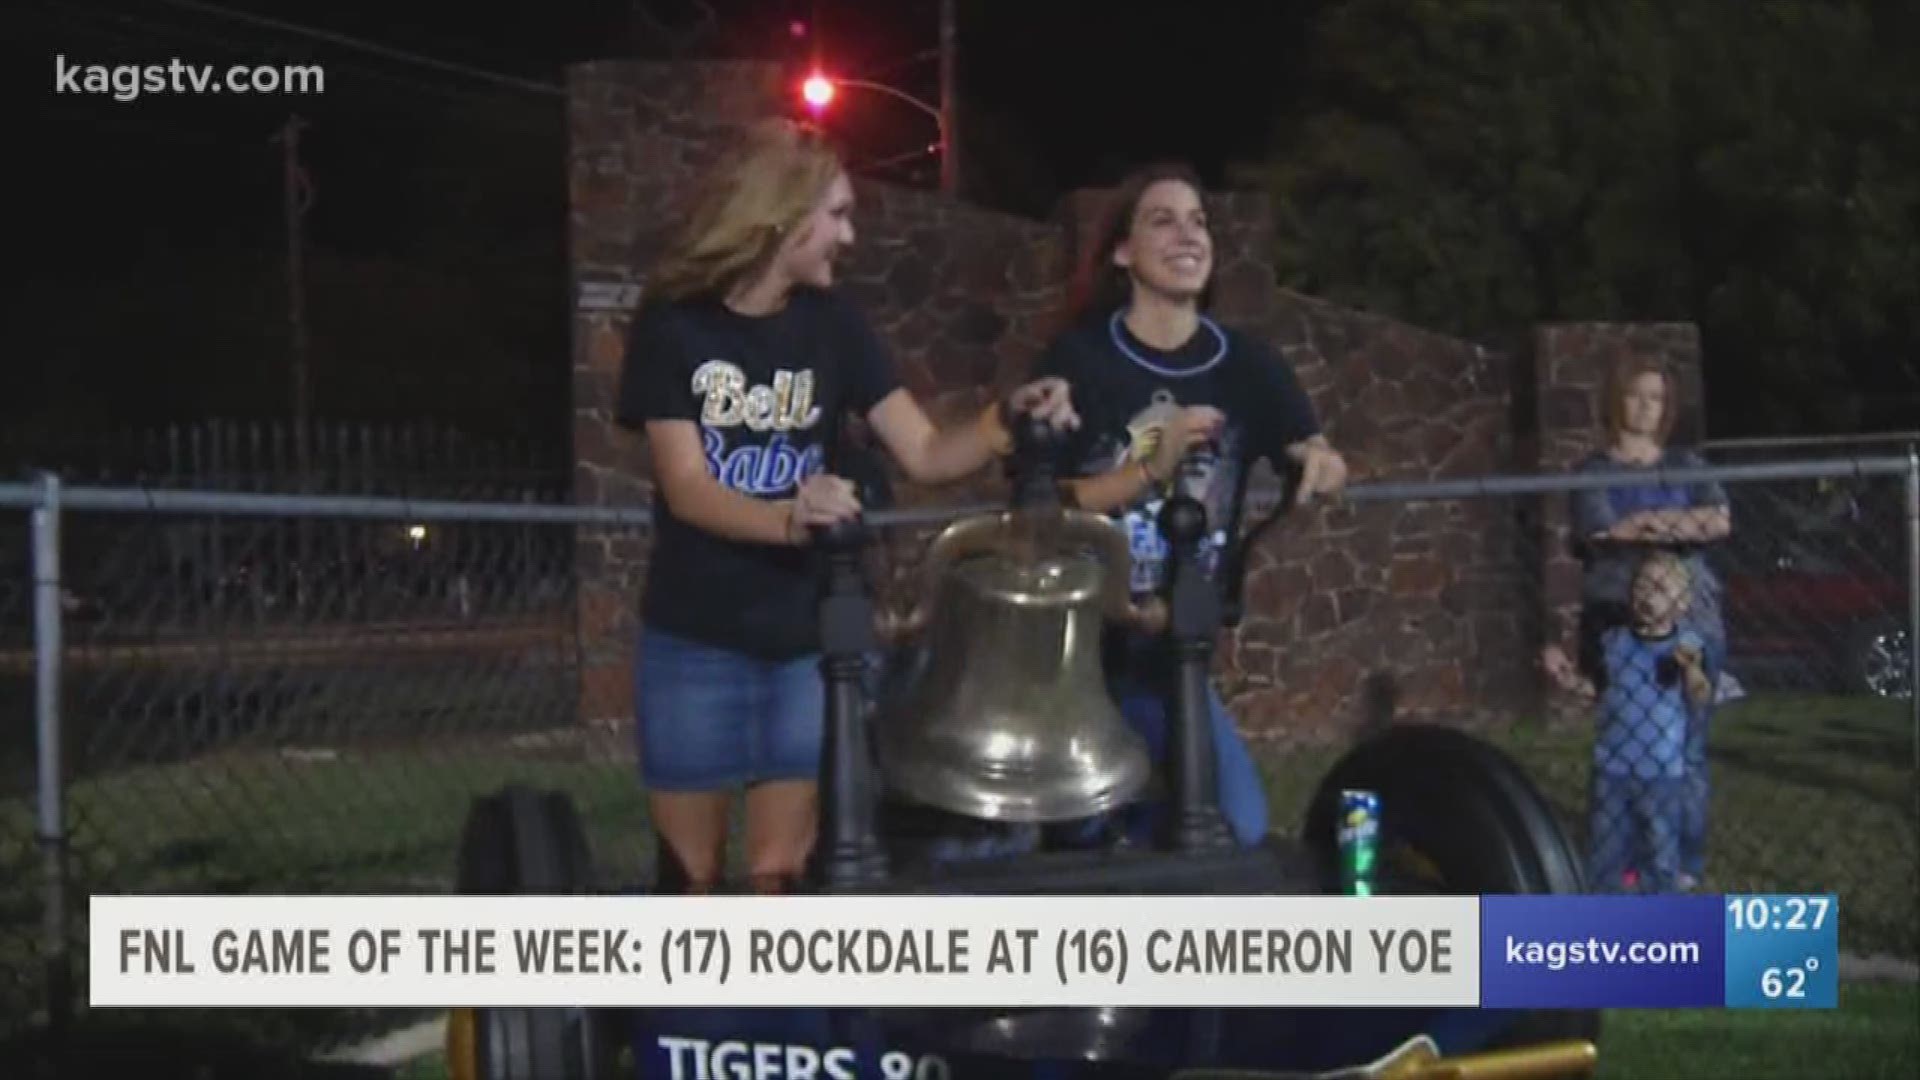 Rivals Rockdale and Cameron Yoe will do battle in the Friday Night Lights game of the week. This will be the 64th edition of the Battle of the Bell.